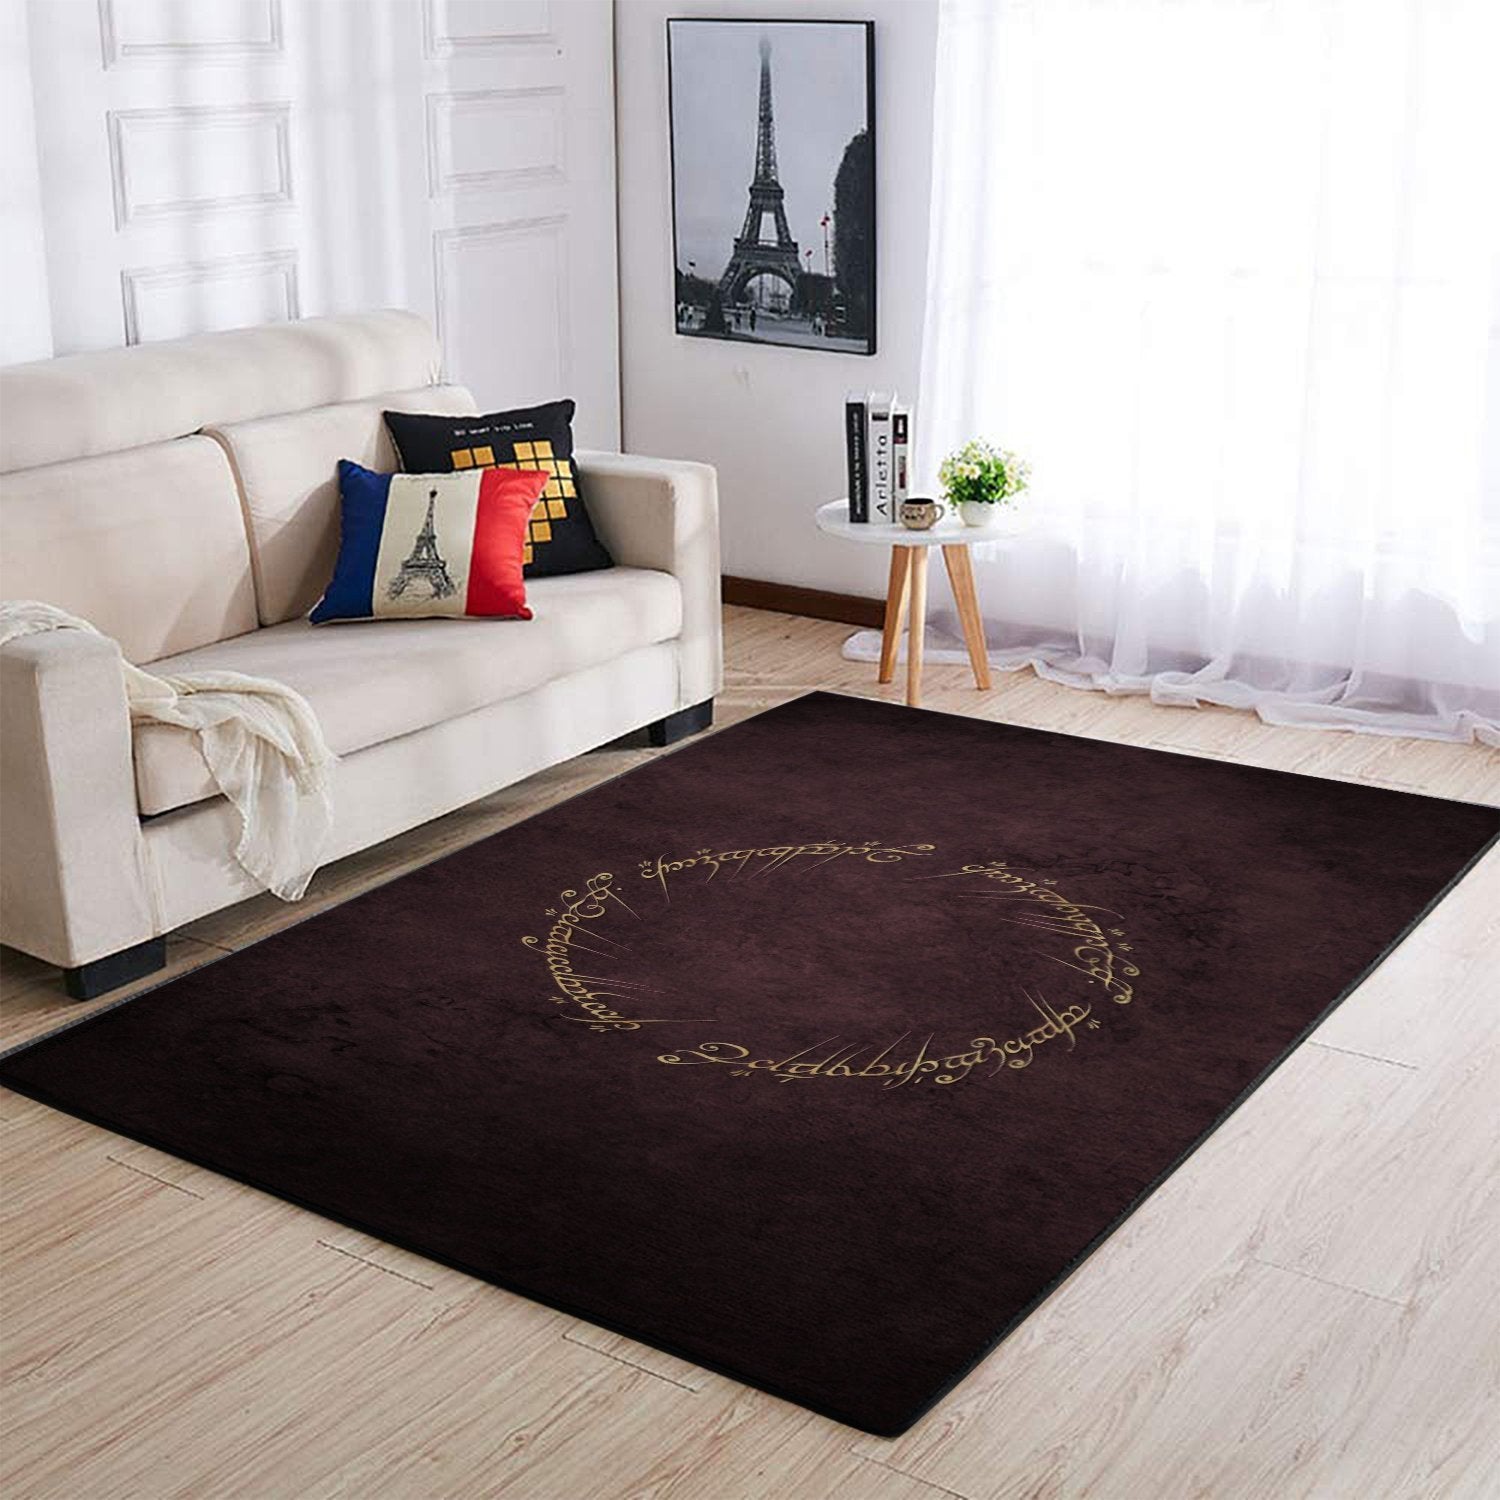 Lord Of The Rings 2 Area Rug Floor Home Room Decor